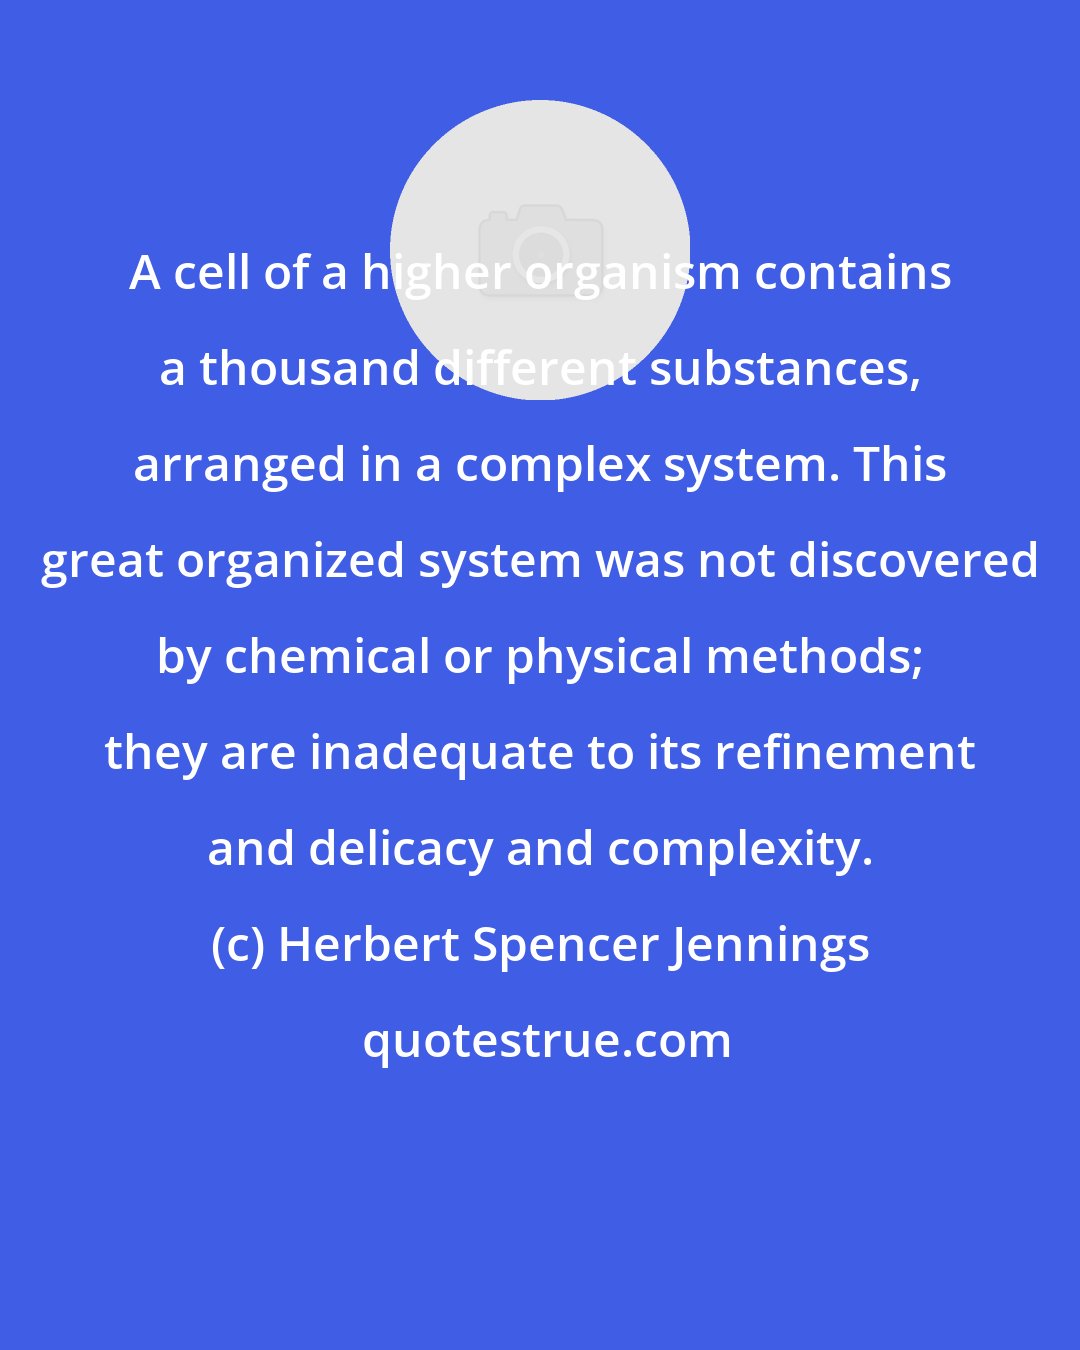 Herbert Spencer Jennings: A cell of a higher organism contains a thousand different substances, arranged in a complex system. This great organized system was not discovered by chemical or physical methods; they are inadequate to its refinement and delicacy and complexity.